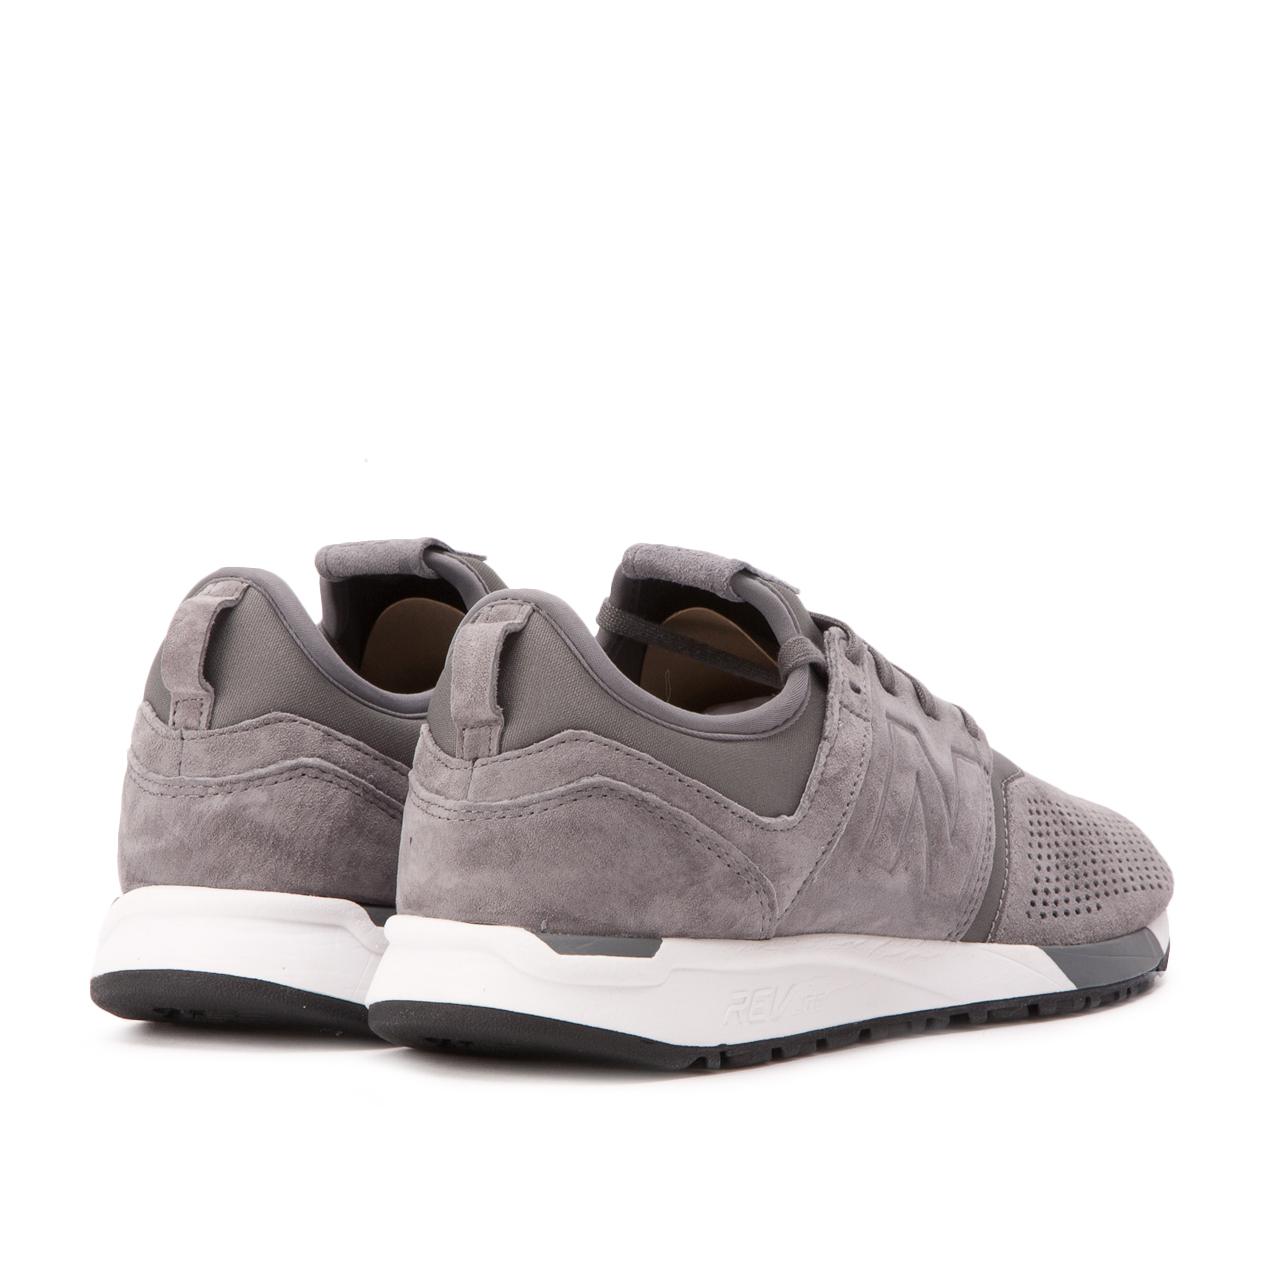 New Balance Suede Mrl 247 Ly in Grey (Gray) for Men - Lyst